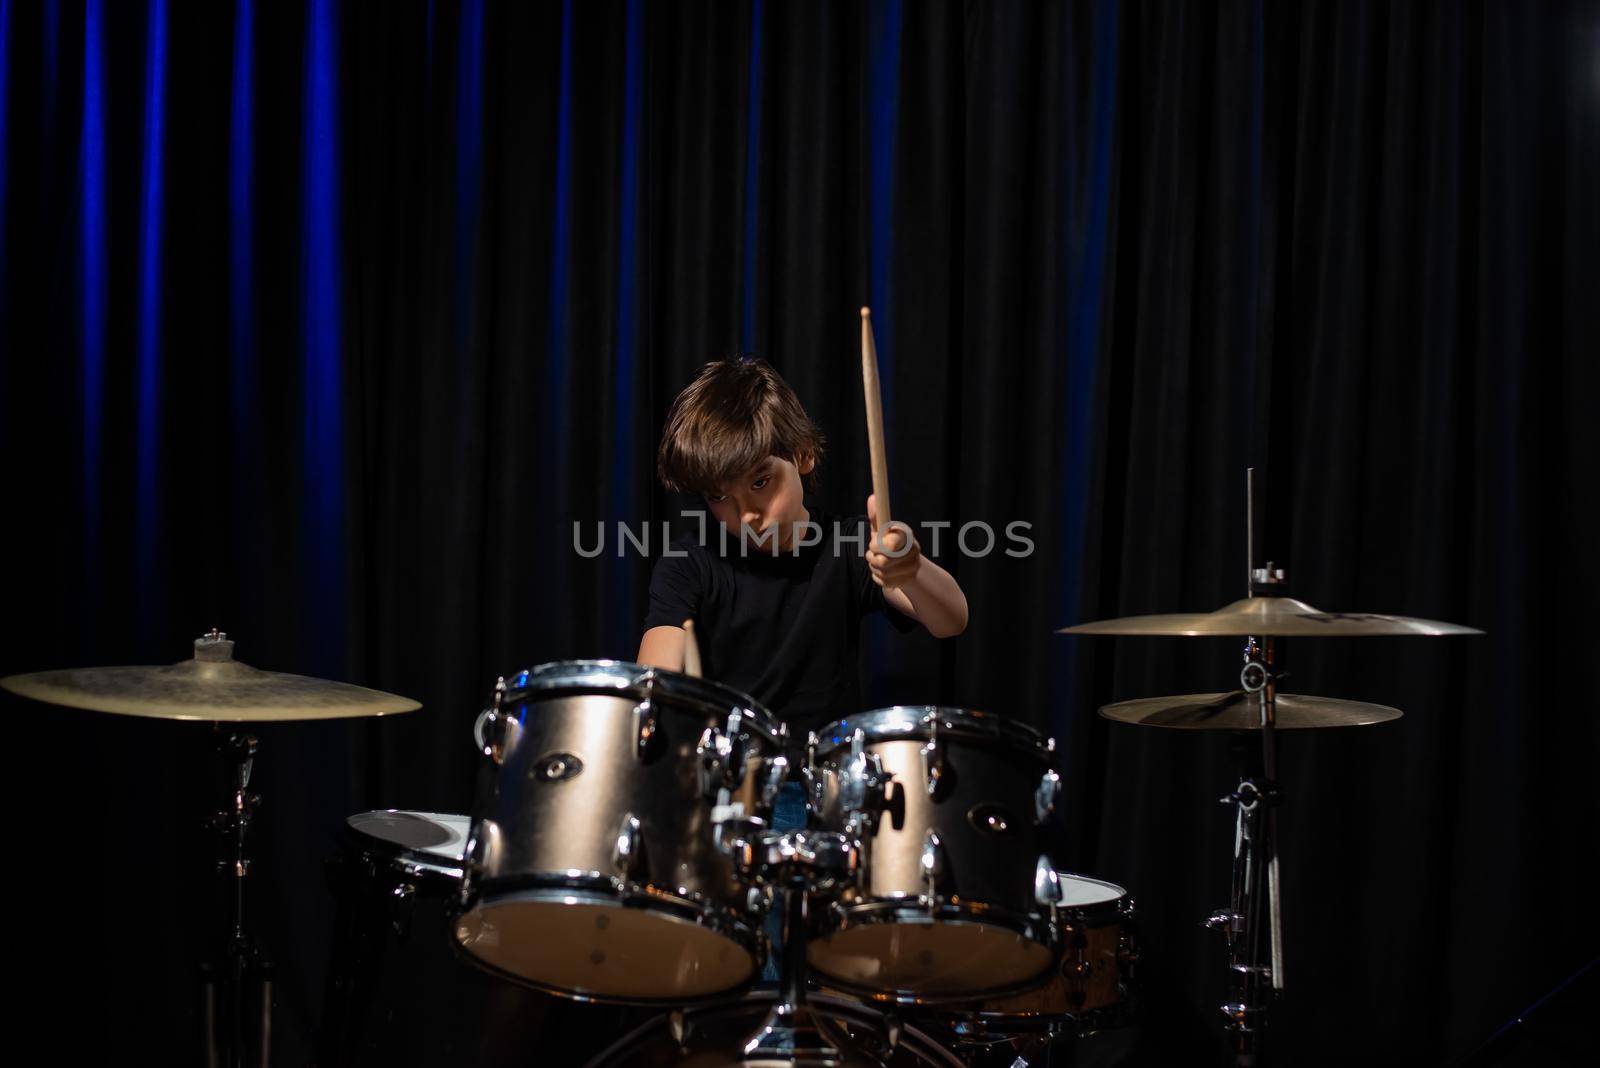 The boy learns to play the drums in the studio on a black background. Music school student by mrwed54